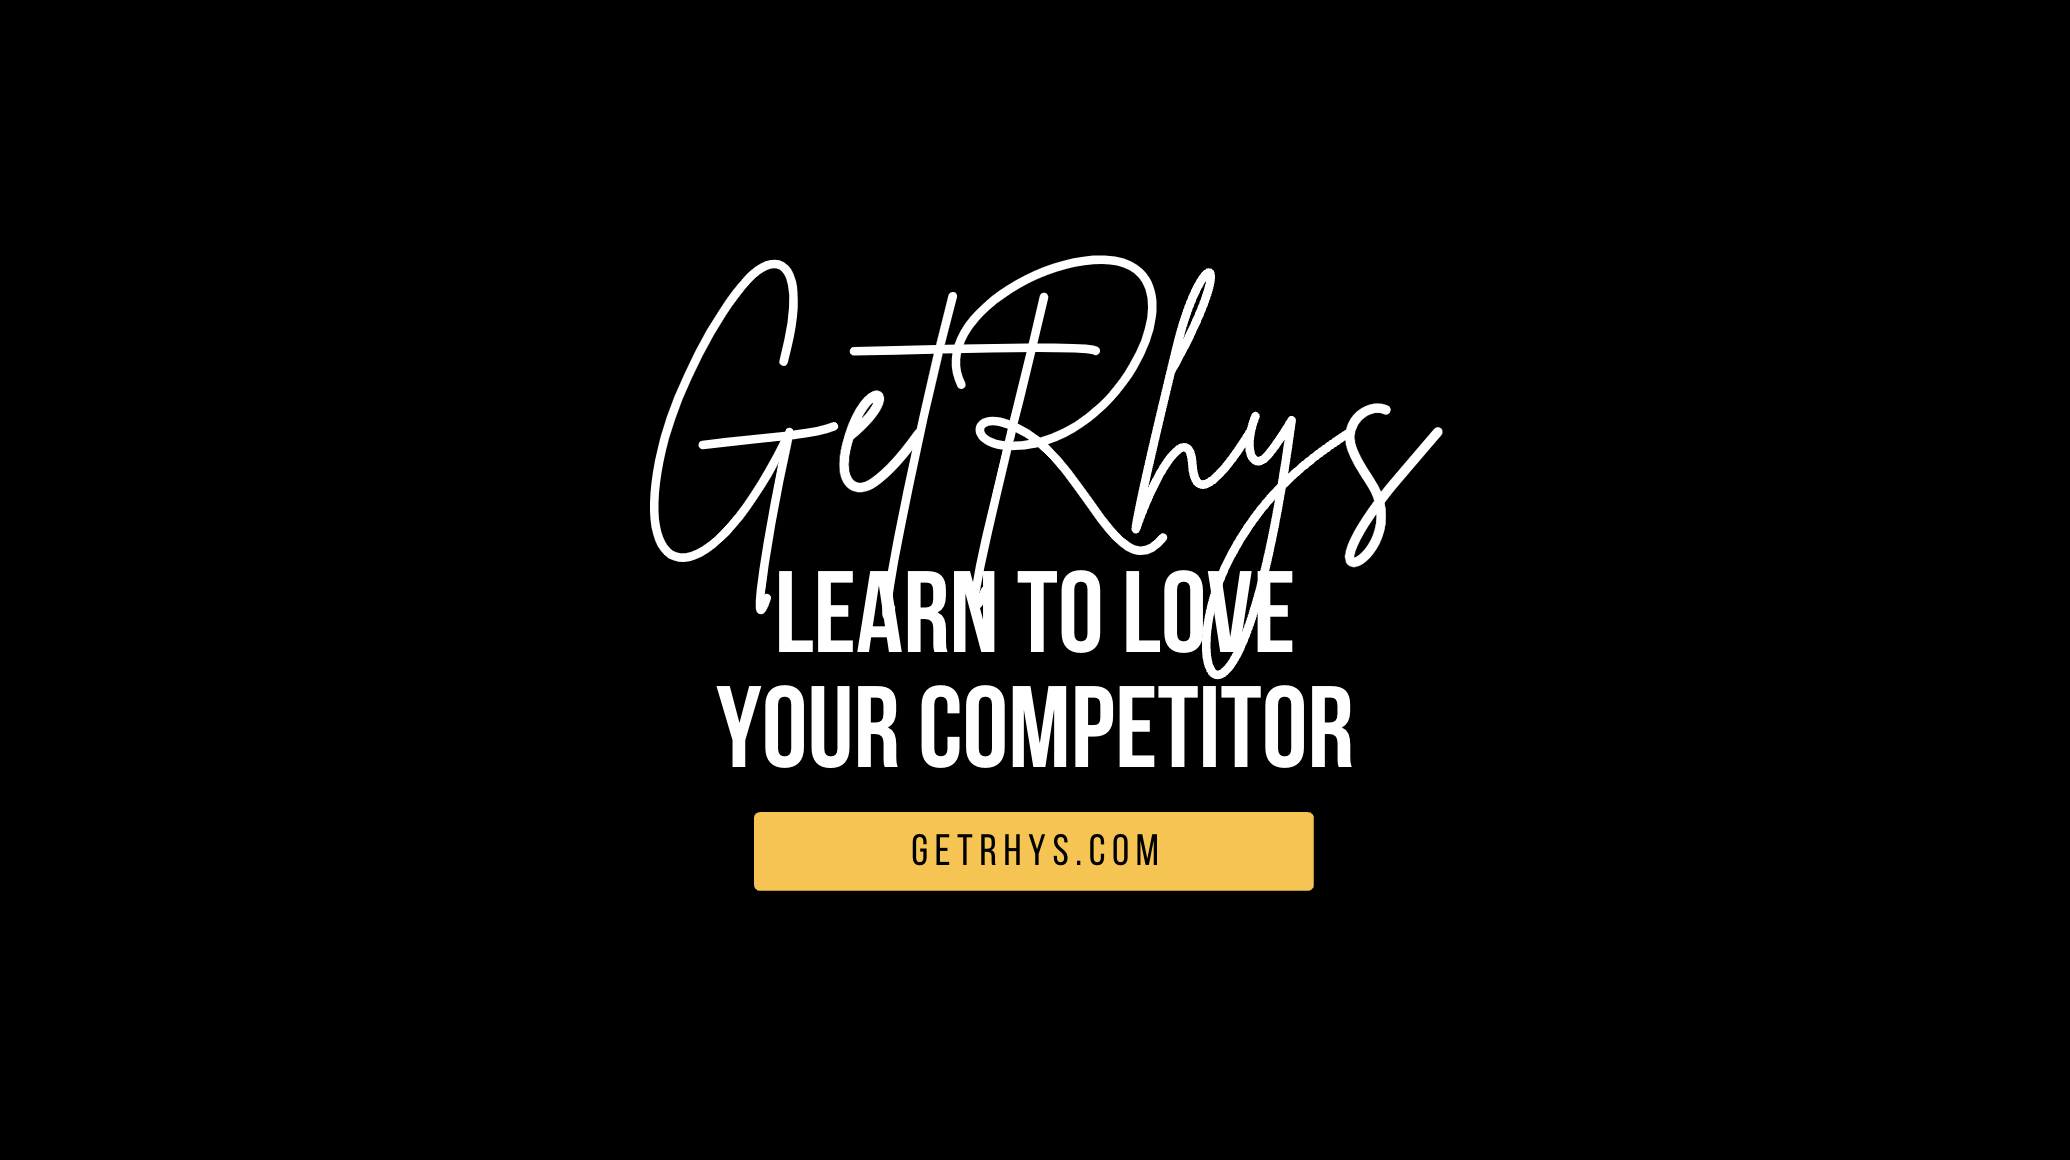 Learn to love your competitor